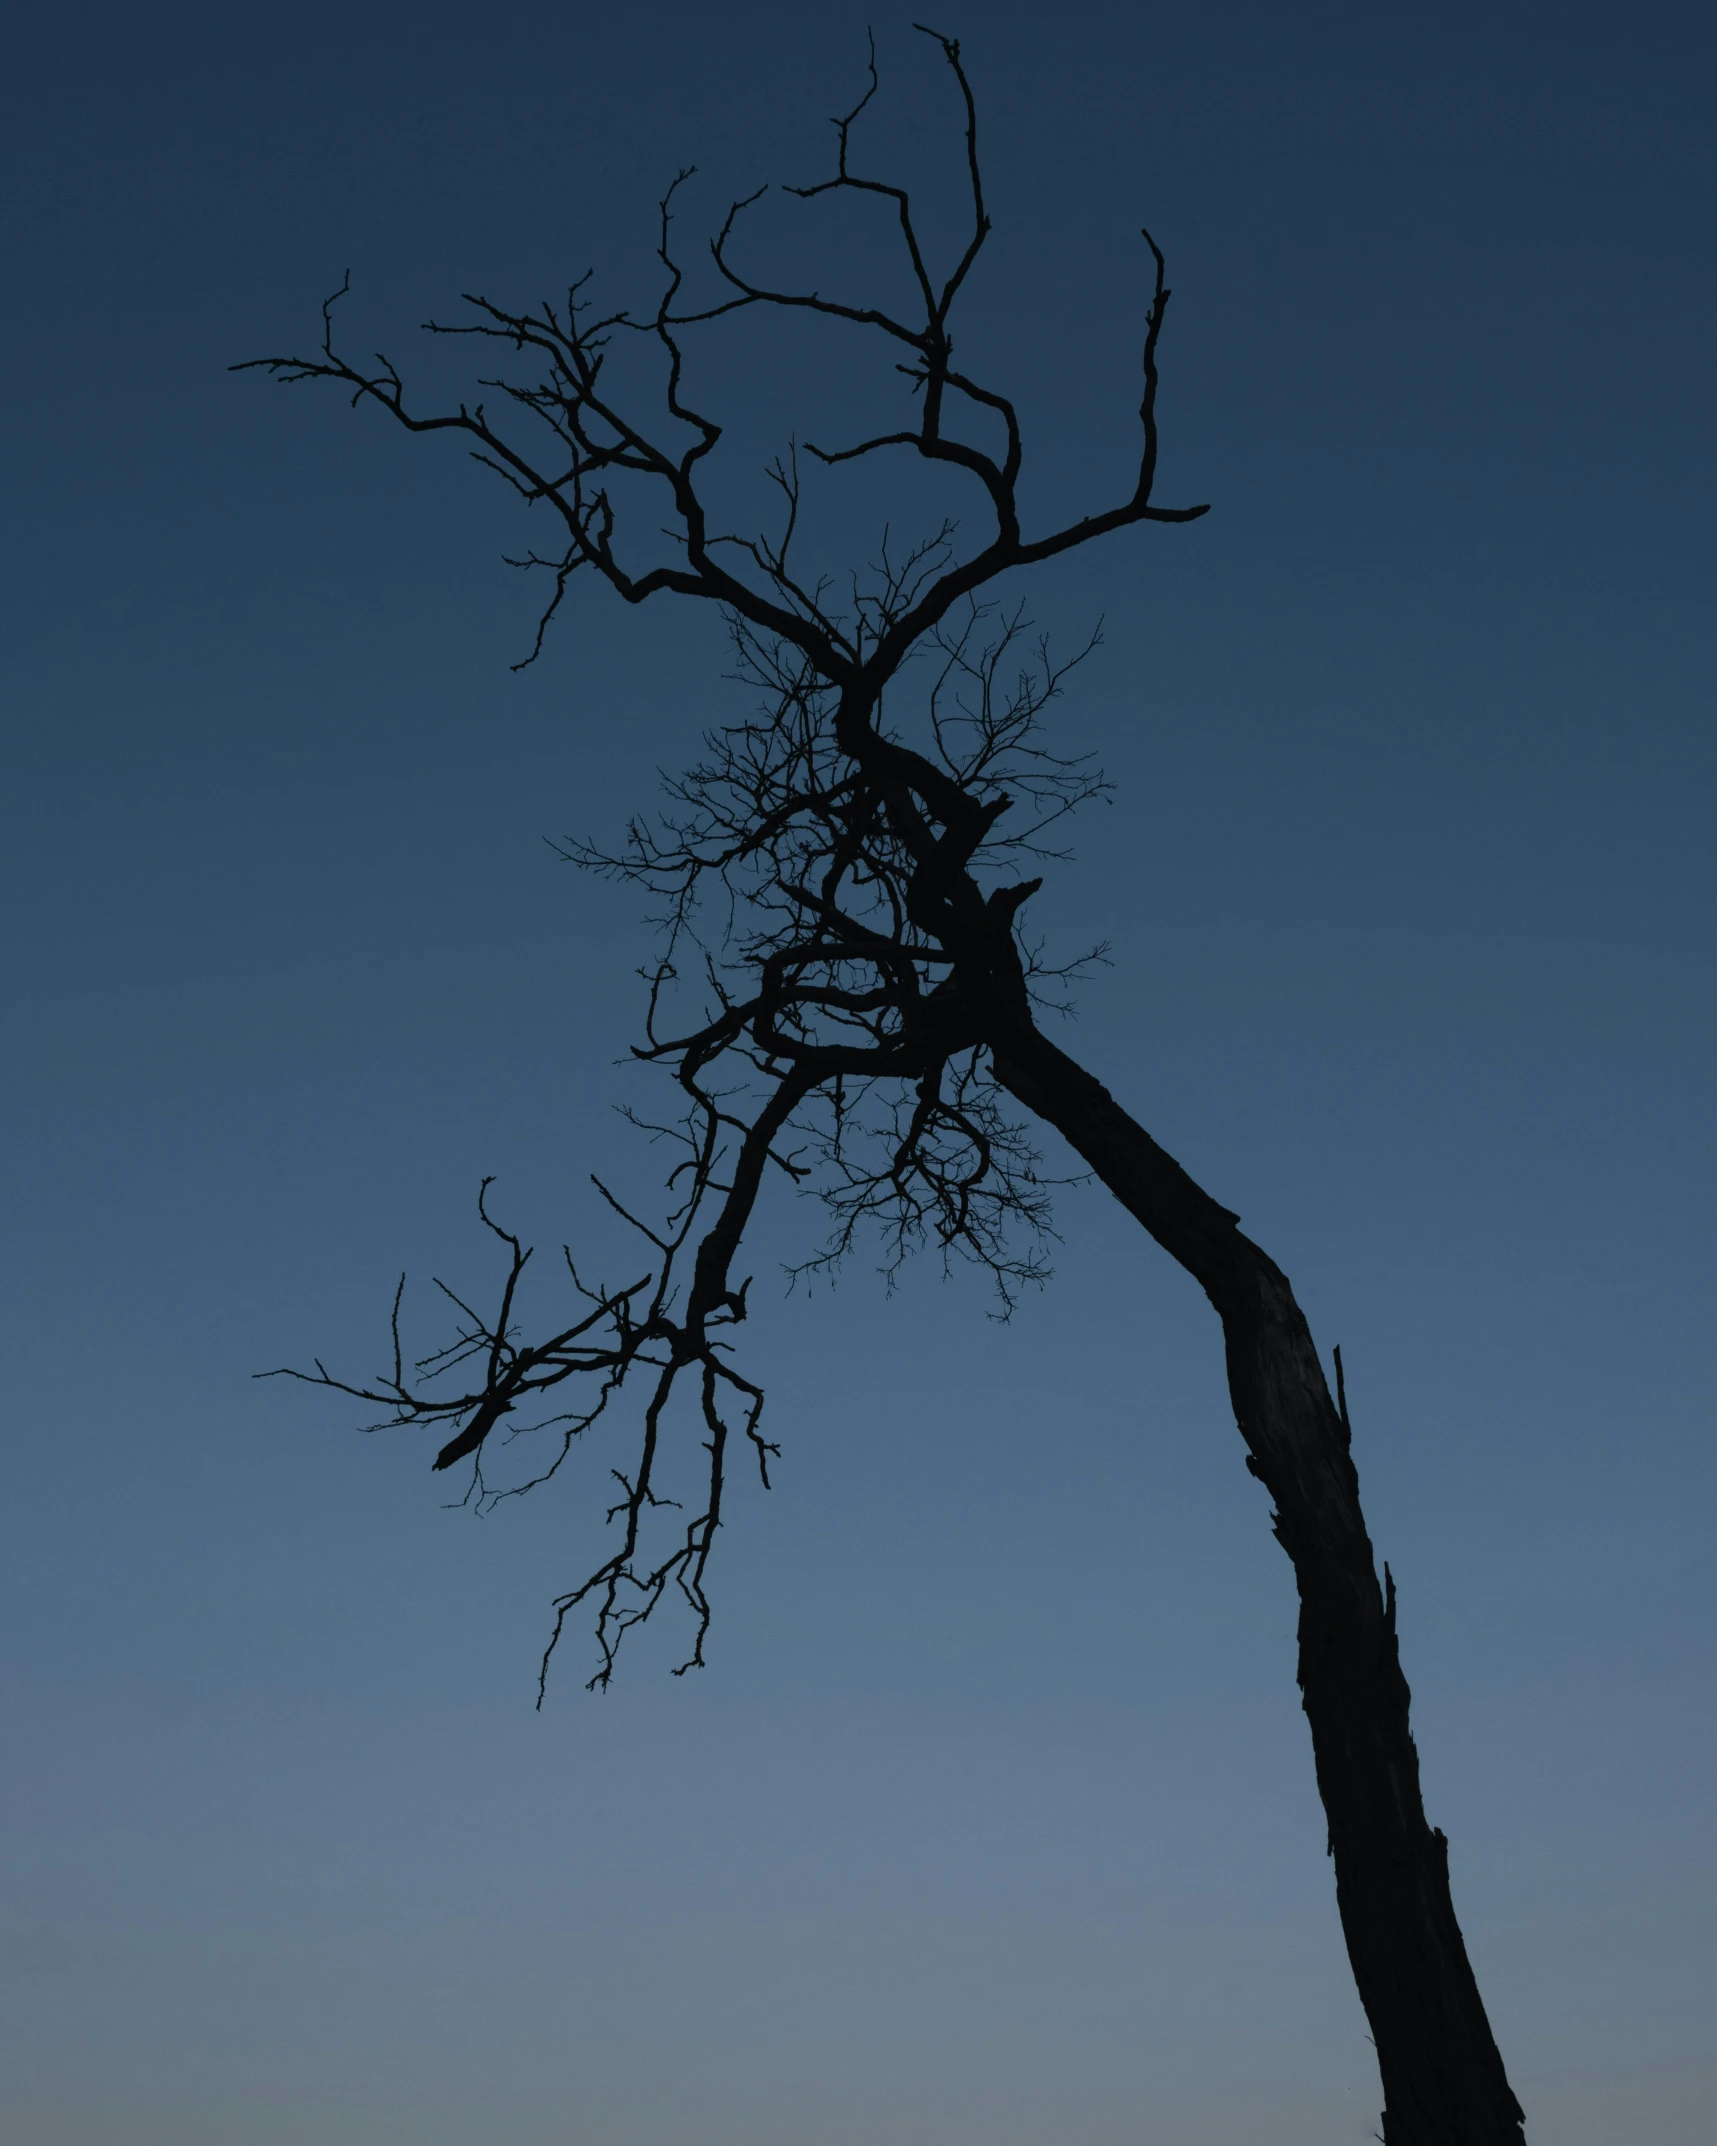 a lone tree is silhouetted against a blue sky, by Attila Meszlenyi, deteriorated, standing in a dark, no cropping, low quality photo